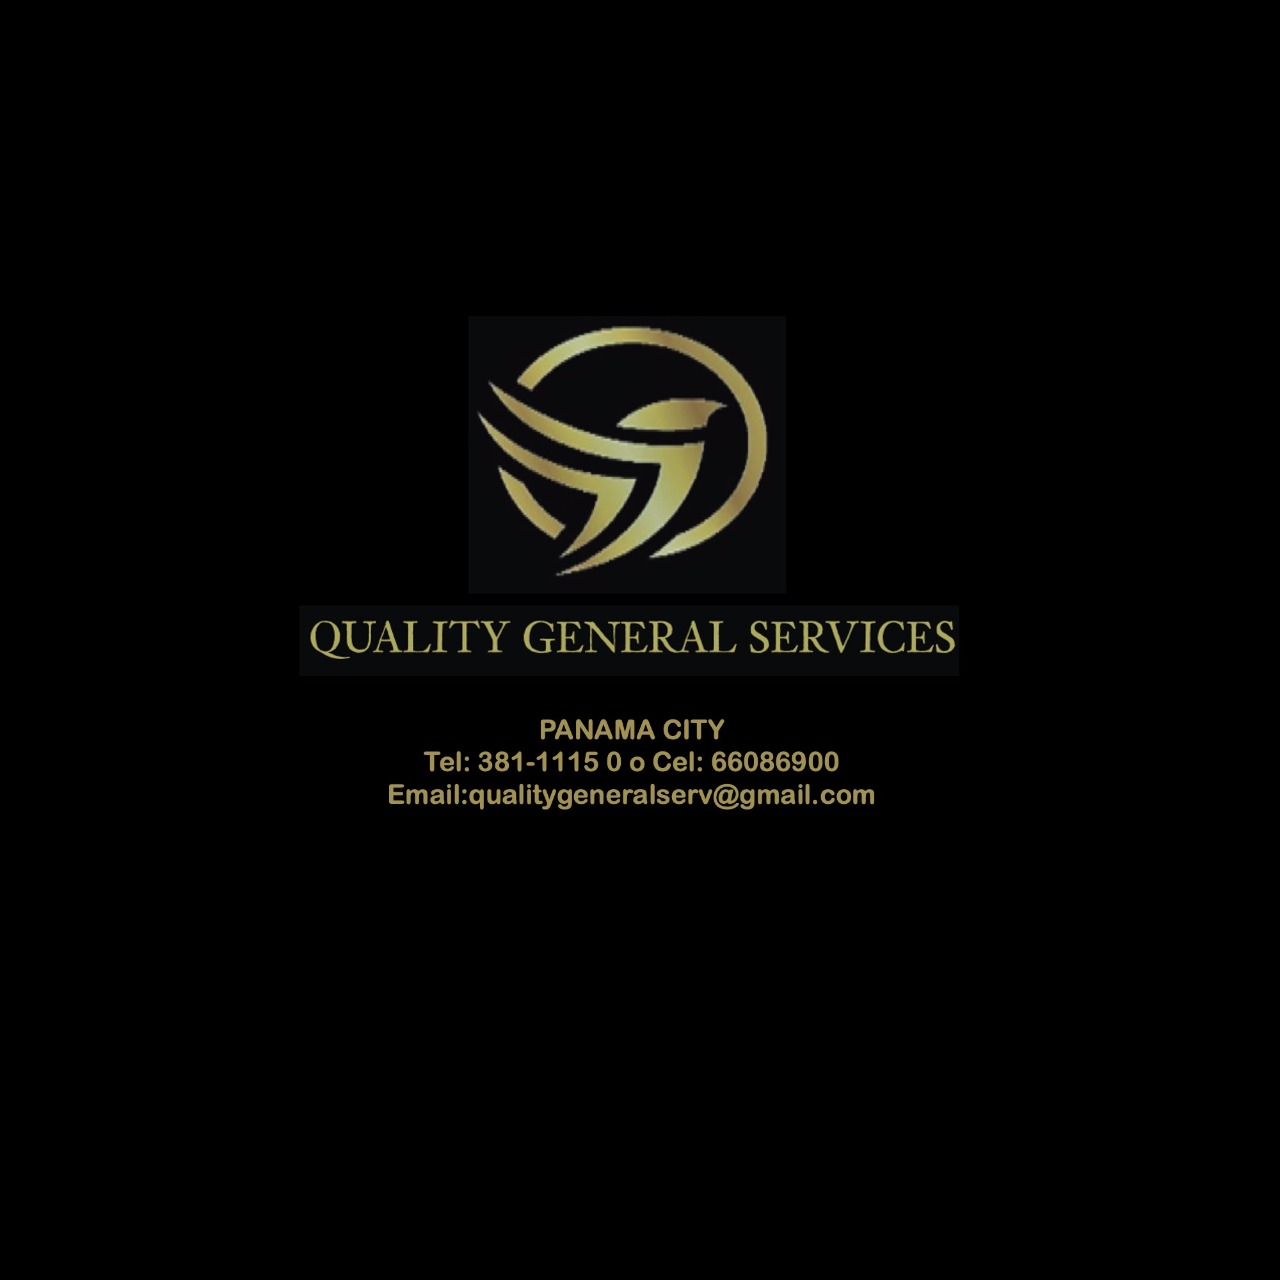 Logo QUALITY GENERAL SERVICES